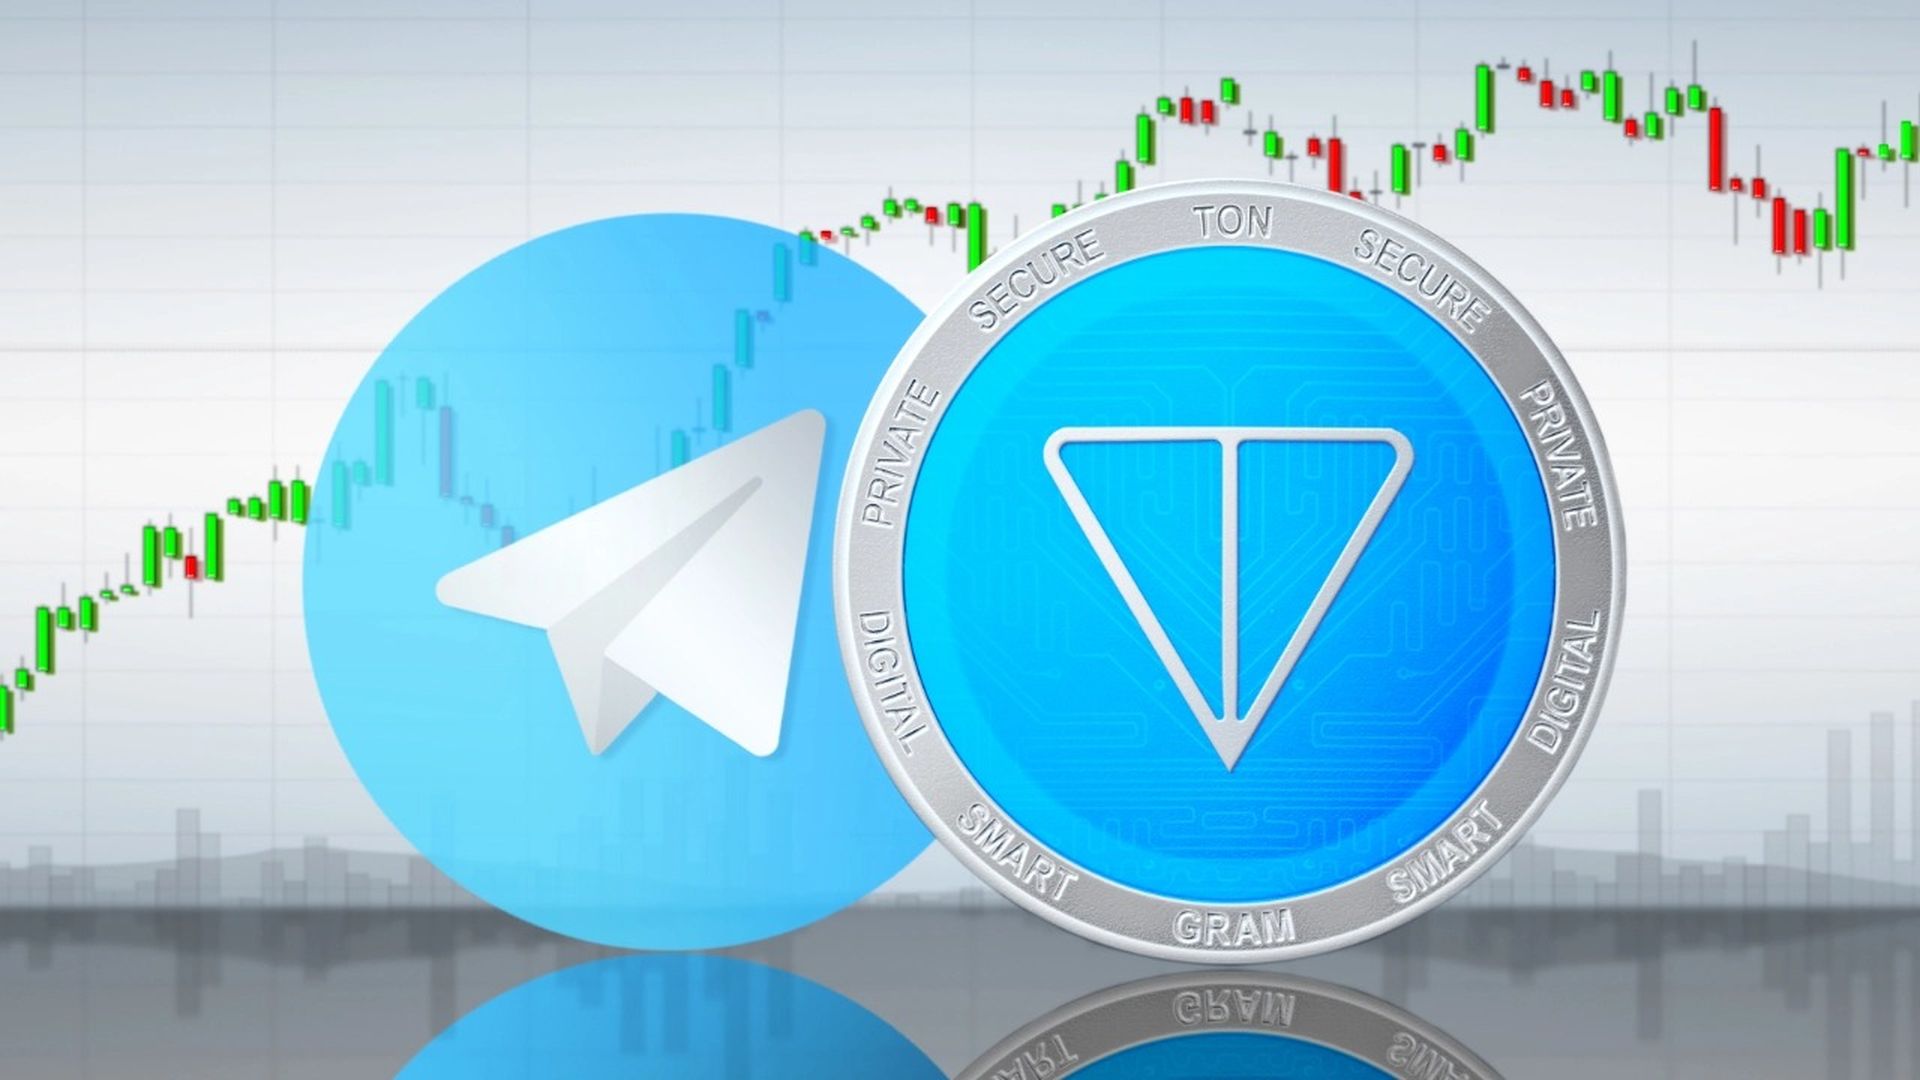 Telegram users can now trade TON